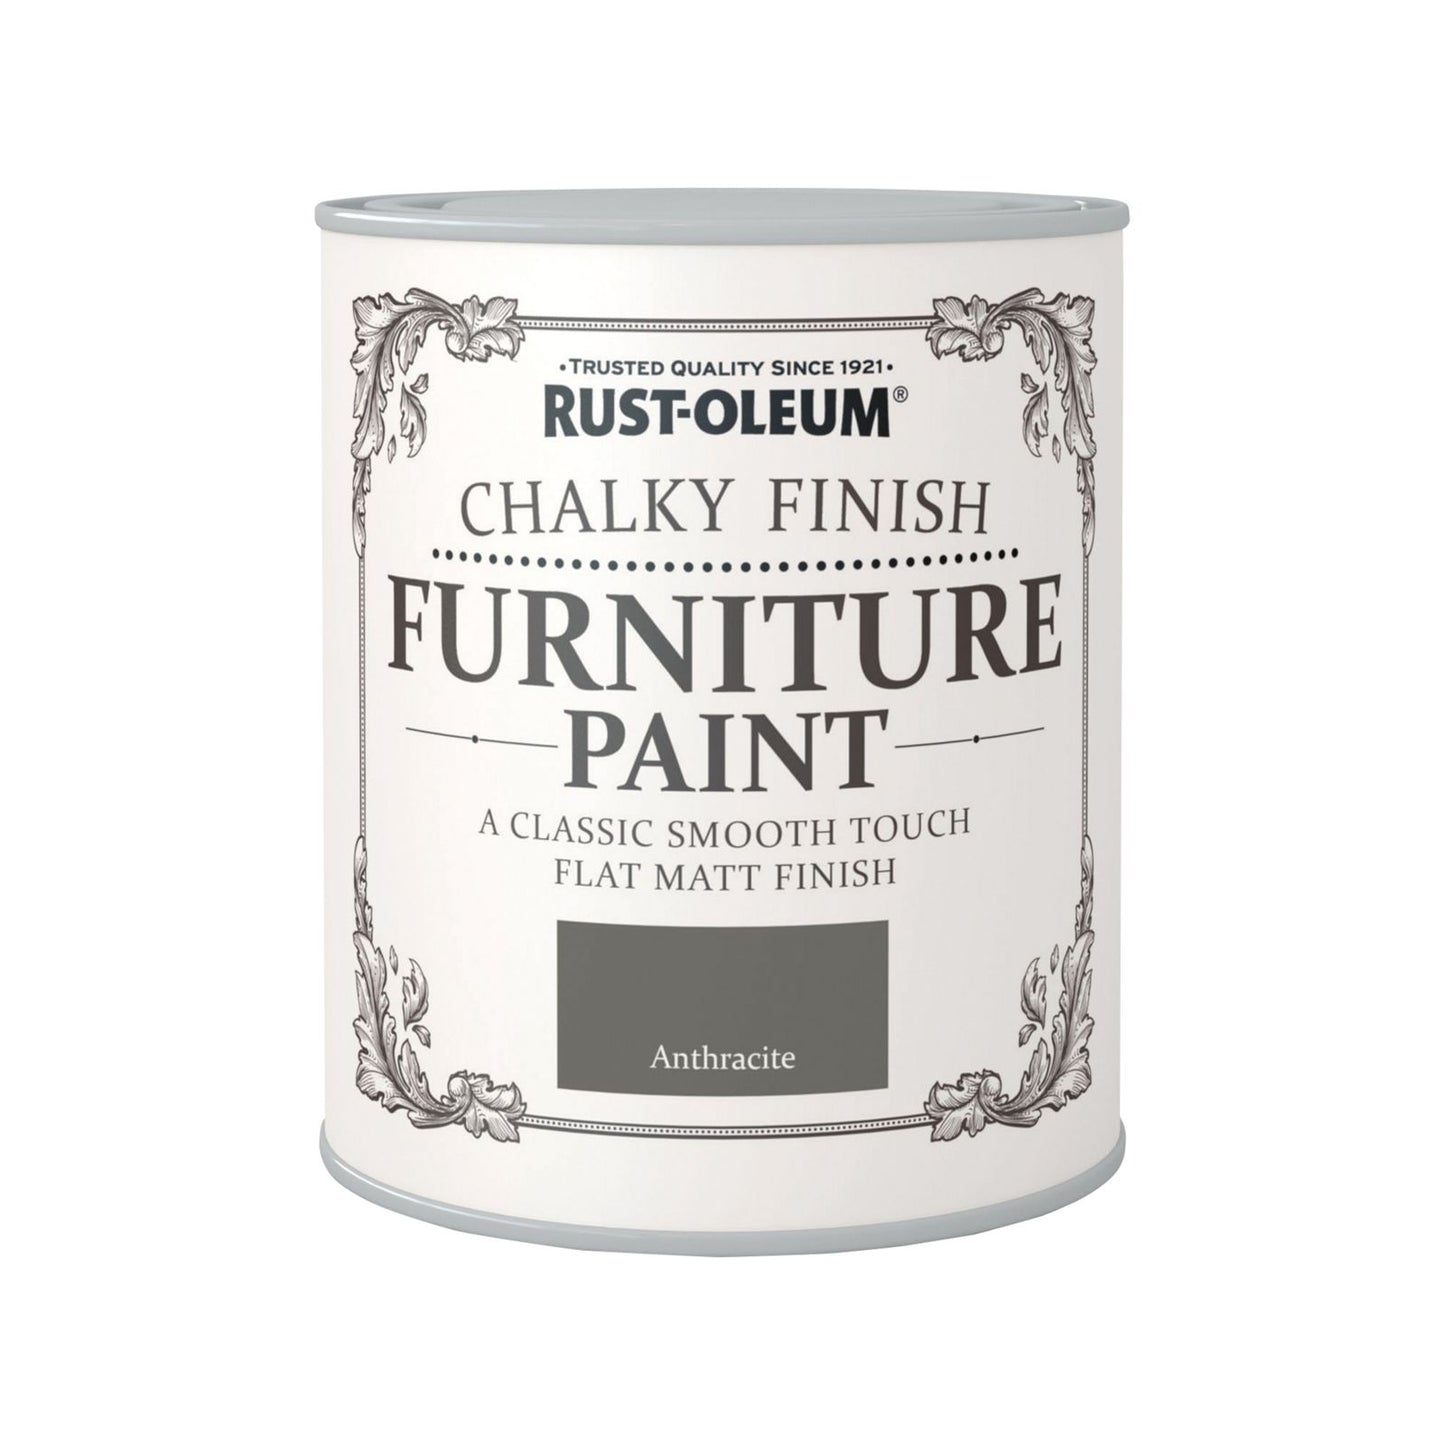 Rust-Oleum Chalky Finish Furniture Paint Anthracite